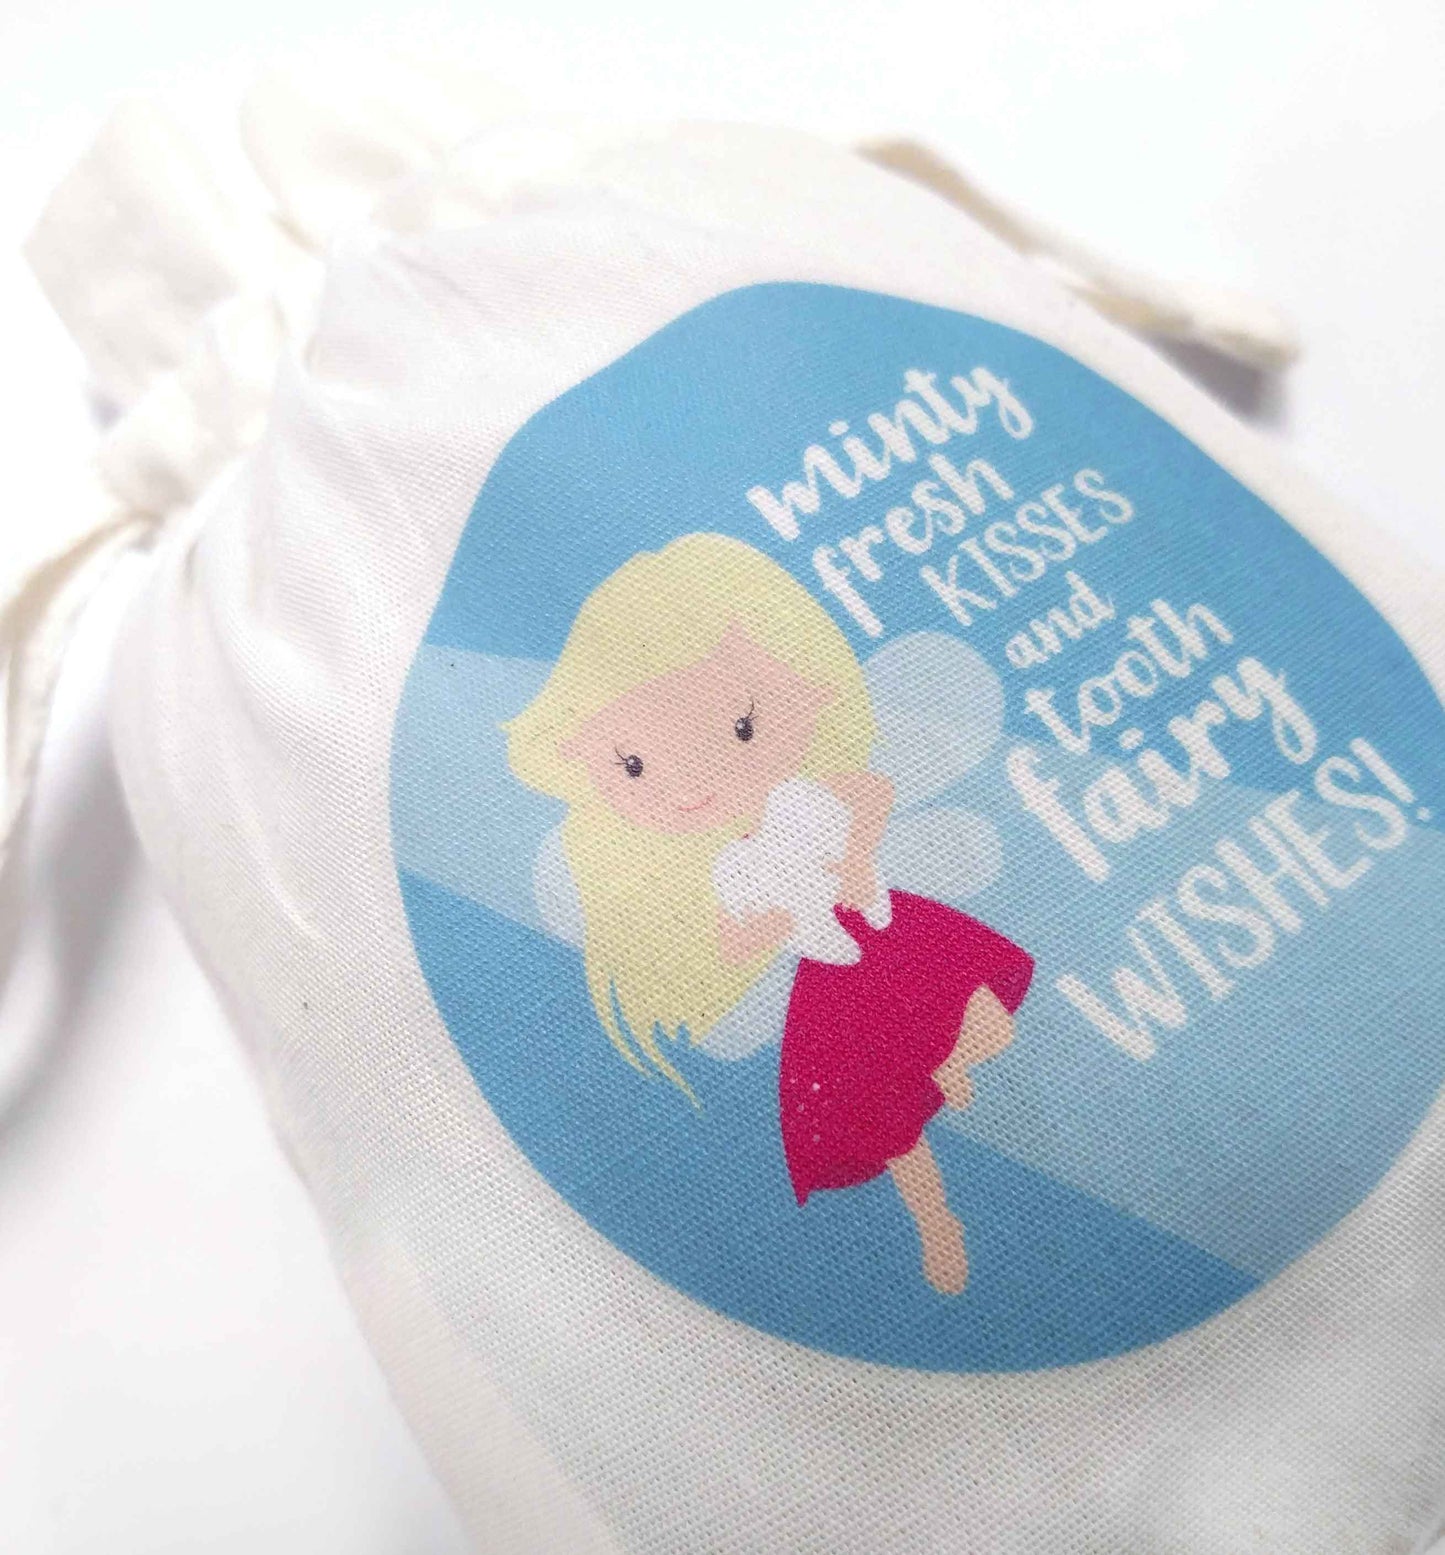 Minty fresh kisses and tooth fairy wishes | Organic Cotton drawstring bag | Flox Creative